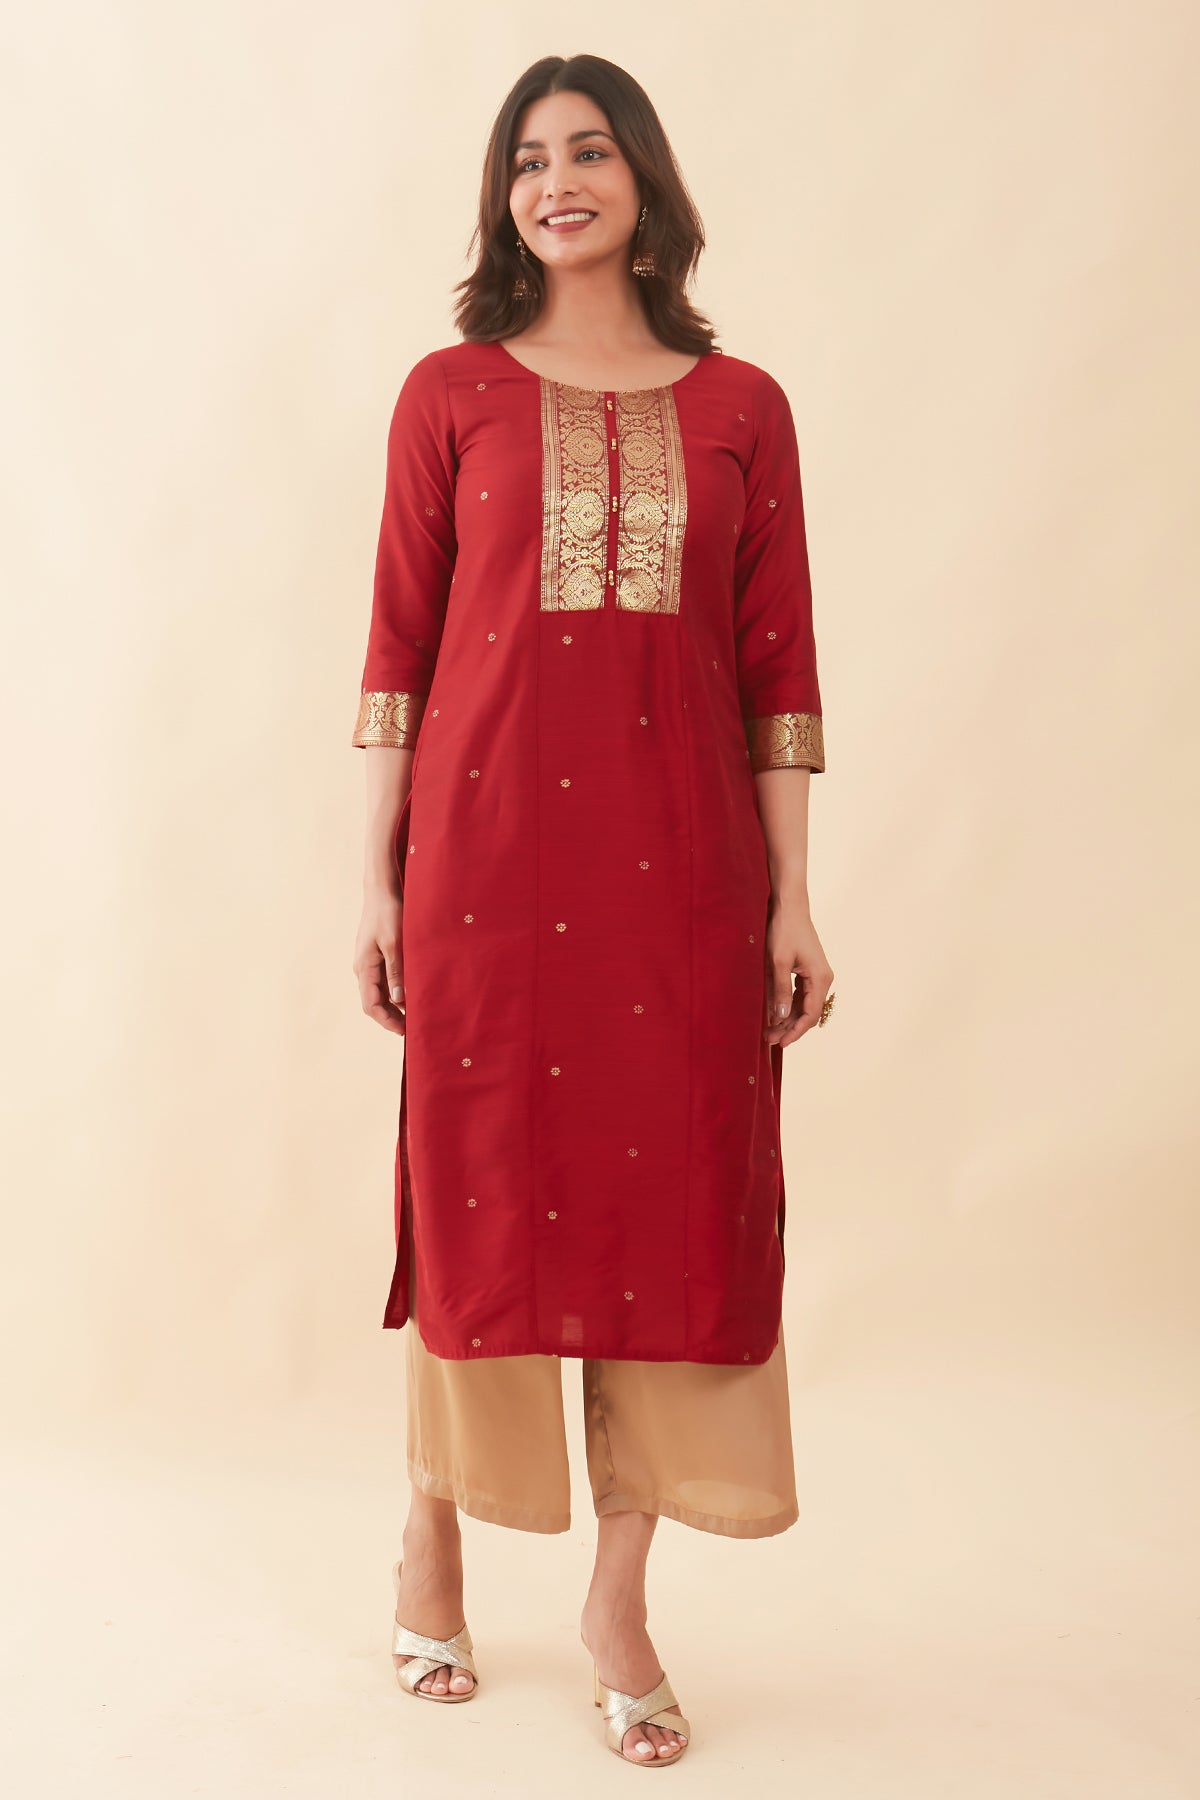 All Over Floral Printed Zari Patchwork Kurta - Red